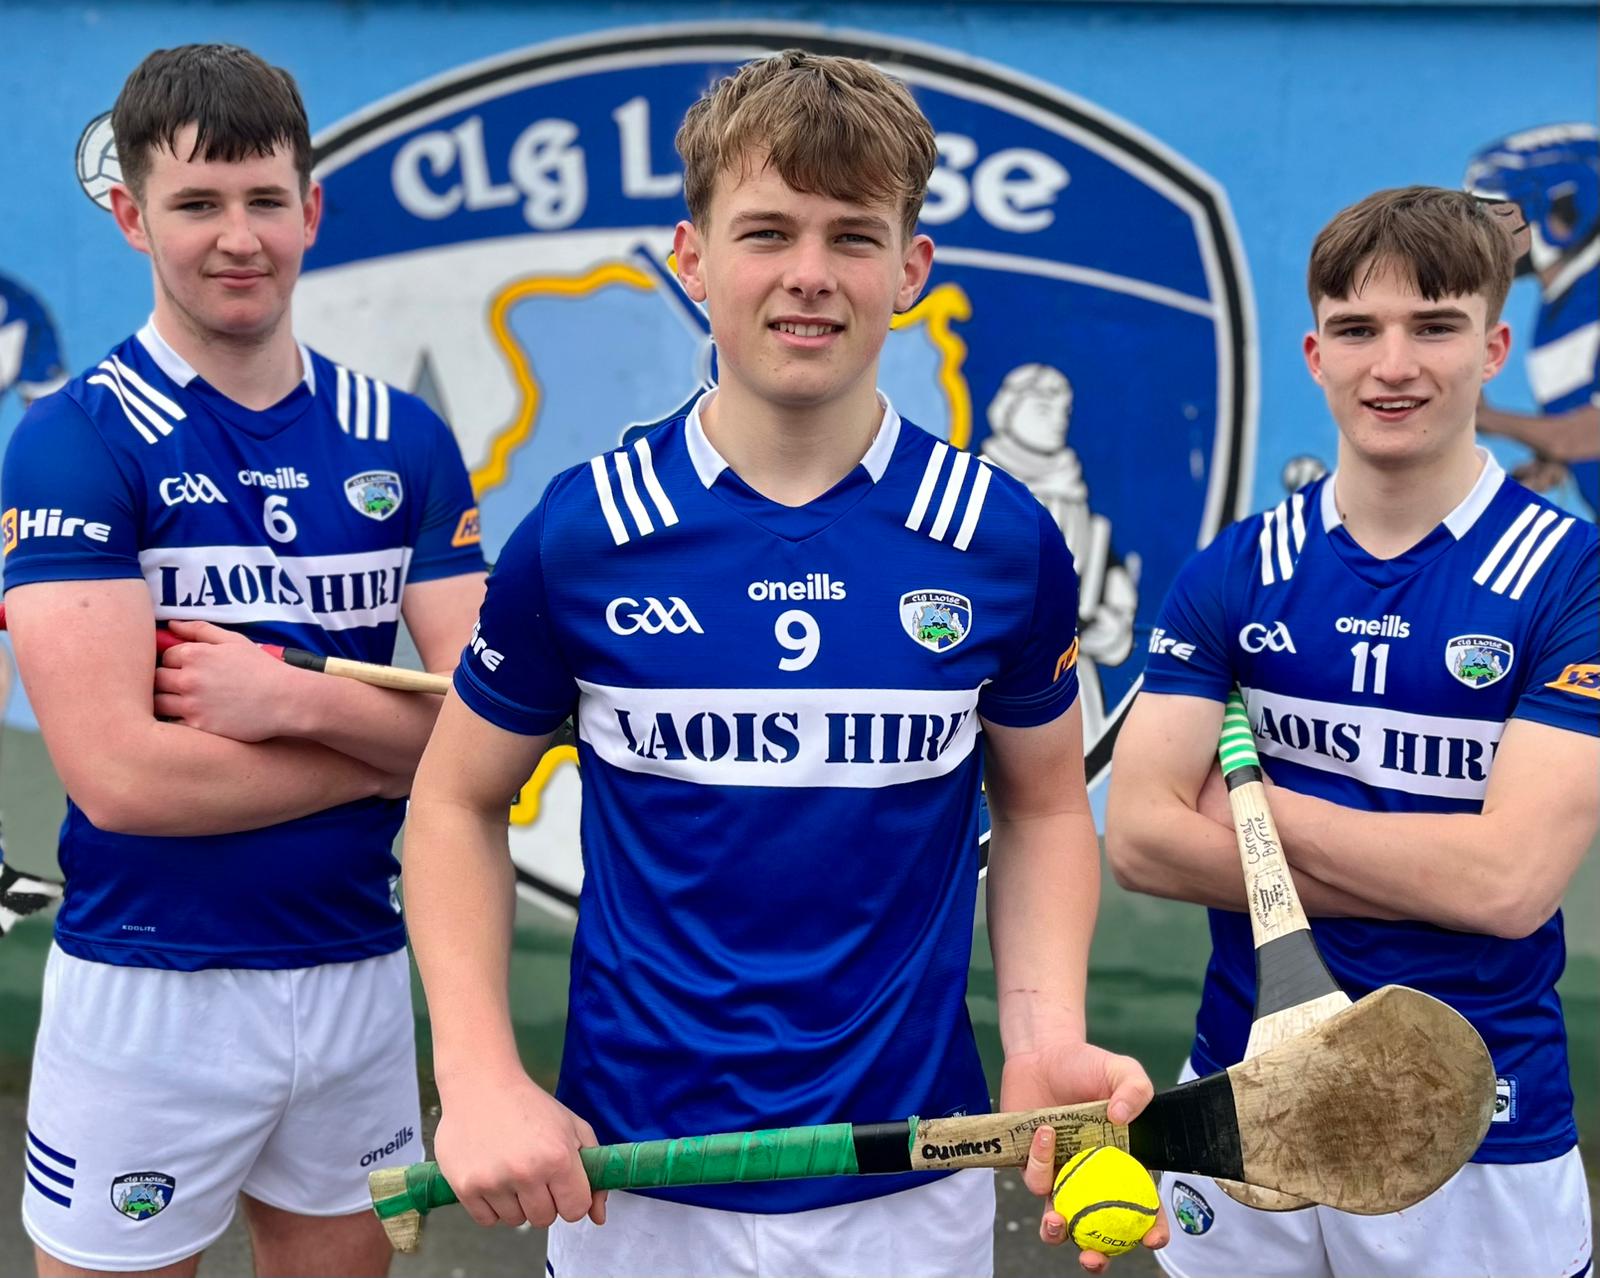 Laois Minor Hurling Captain Eoghan Murphy, vice captains Ryan Peters and Cormac Byrne